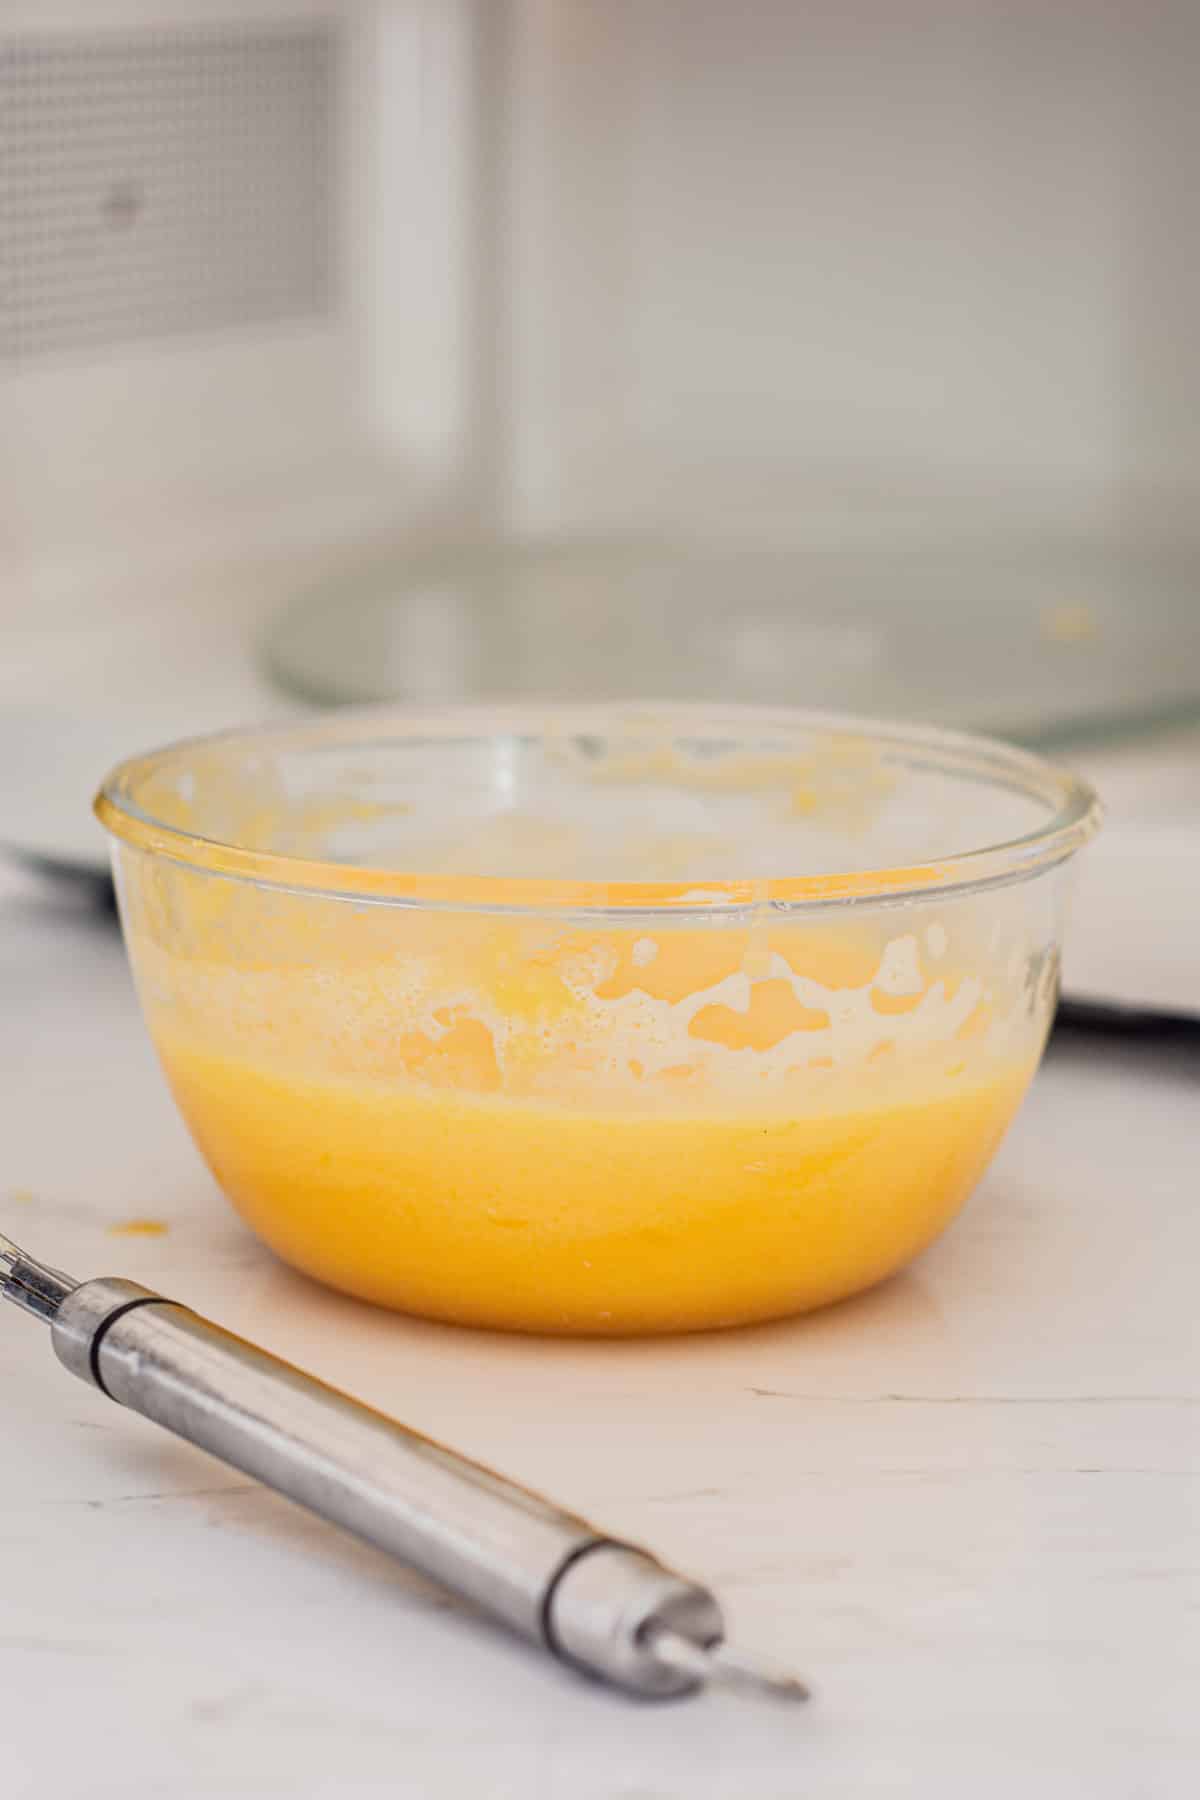 lemon curd in a bowl next to a microwave.